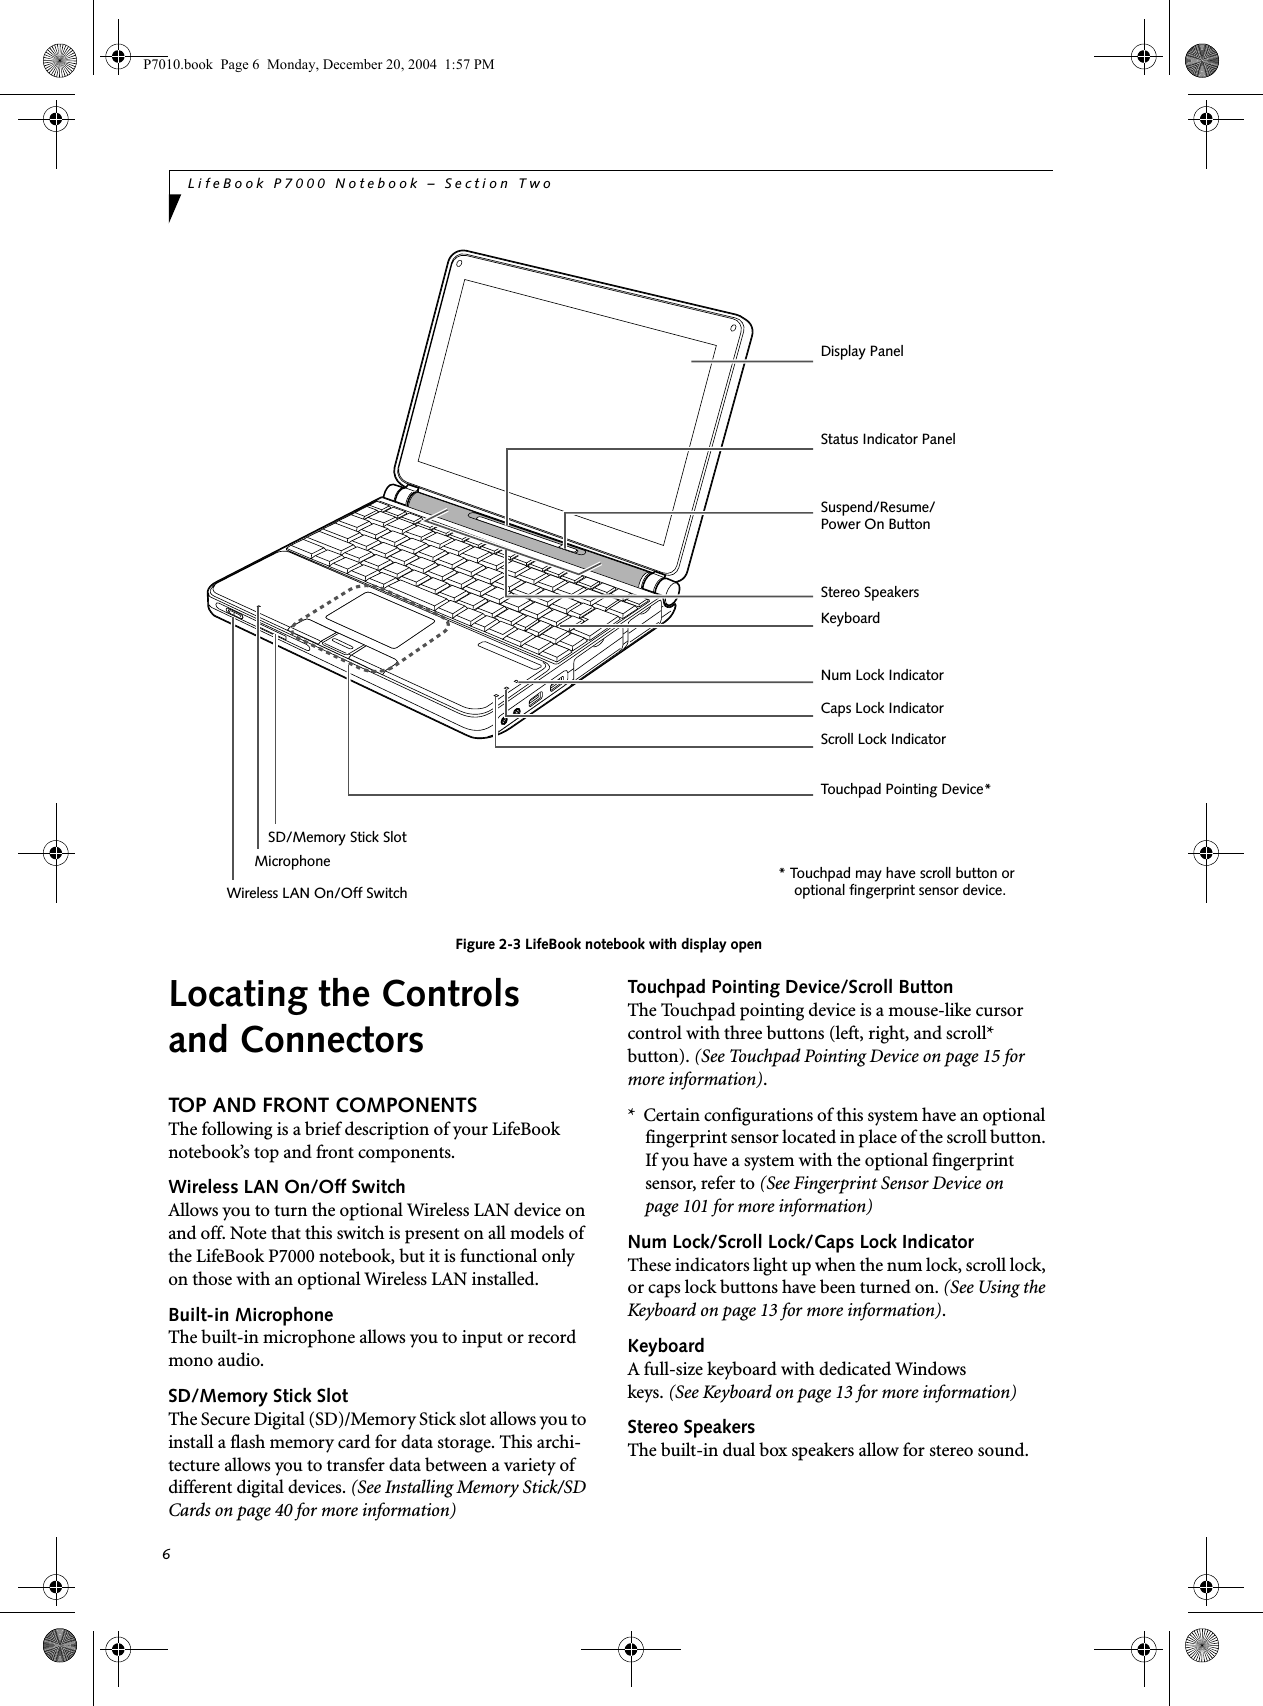 6LifeBook P7000 Notebook – Section TwoFigure 2-3 LifeBook notebook with display openLocating the Controlsand ConnectorsTOP AND FRONT COMPONENTSThe following is a brief description of your LifeBook notebook’s top and front components. Wireless LAN On/Off SwitchAllows you to turn the optional Wireless LAN device on and off. Note that this switch is present on all models of the LifeBook P7000 notebook, but it is functional only on those with an optional Wireless LAN installed. Built-in MicrophoneThe built-in microphone allows you to input or record mono audio.SD/Memory Stick SlotThe Secure Digital (SD)/Memory Stick slot allows you to install a flash memory card for data storage. This archi-tecture allows you to transfer data between a variety of different digital devices. (See Installing Memory Stick/SD Cards on page 40 for more information)Touchpad Pointing Device/Scroll ButtonThe Touchpad pointing device is a mouse-like cursor control with three buttons (left, right, and scroll* button). (See Touchpad Pointing Device on page 15 for more information). *  Certain configurations of this system have an optional fingerprint sensor located in place of the scroll button. If you have a system with the optional fingerprint sensor, refer to (See Fingerprint Sensor Device on page 101 for more information) Num Lock/Scroll Lock/Caps Lock IndicatorThese indicators light up when the num lock, scroll lock, or caps lock buttons have been turned on. (See Using the Keyboard on page 13 for more information).KeyboardA full-size keyboard with dedicated Windowskeys. (See Keyboard on page 13 for more information)Stereo SpeakersThe built-in dual box speakers allow for stereo sound. Display PanelStatus Indicator PanelKeyboardStereo SpeakersSuspend/Resume/ Power On ButtonWireless LAN On/Off SwitchTouchpad Pointing Device*Num Lock IndicatorCaps Lock IndicatorScroll Lock IndicatorMicrophoneSD/Memory Stick Slot* Touchpad may have scroll button or     optional fingerprint sensor device. P7010.book  Page 6  Monday, December 20, 2004  1:57 PM